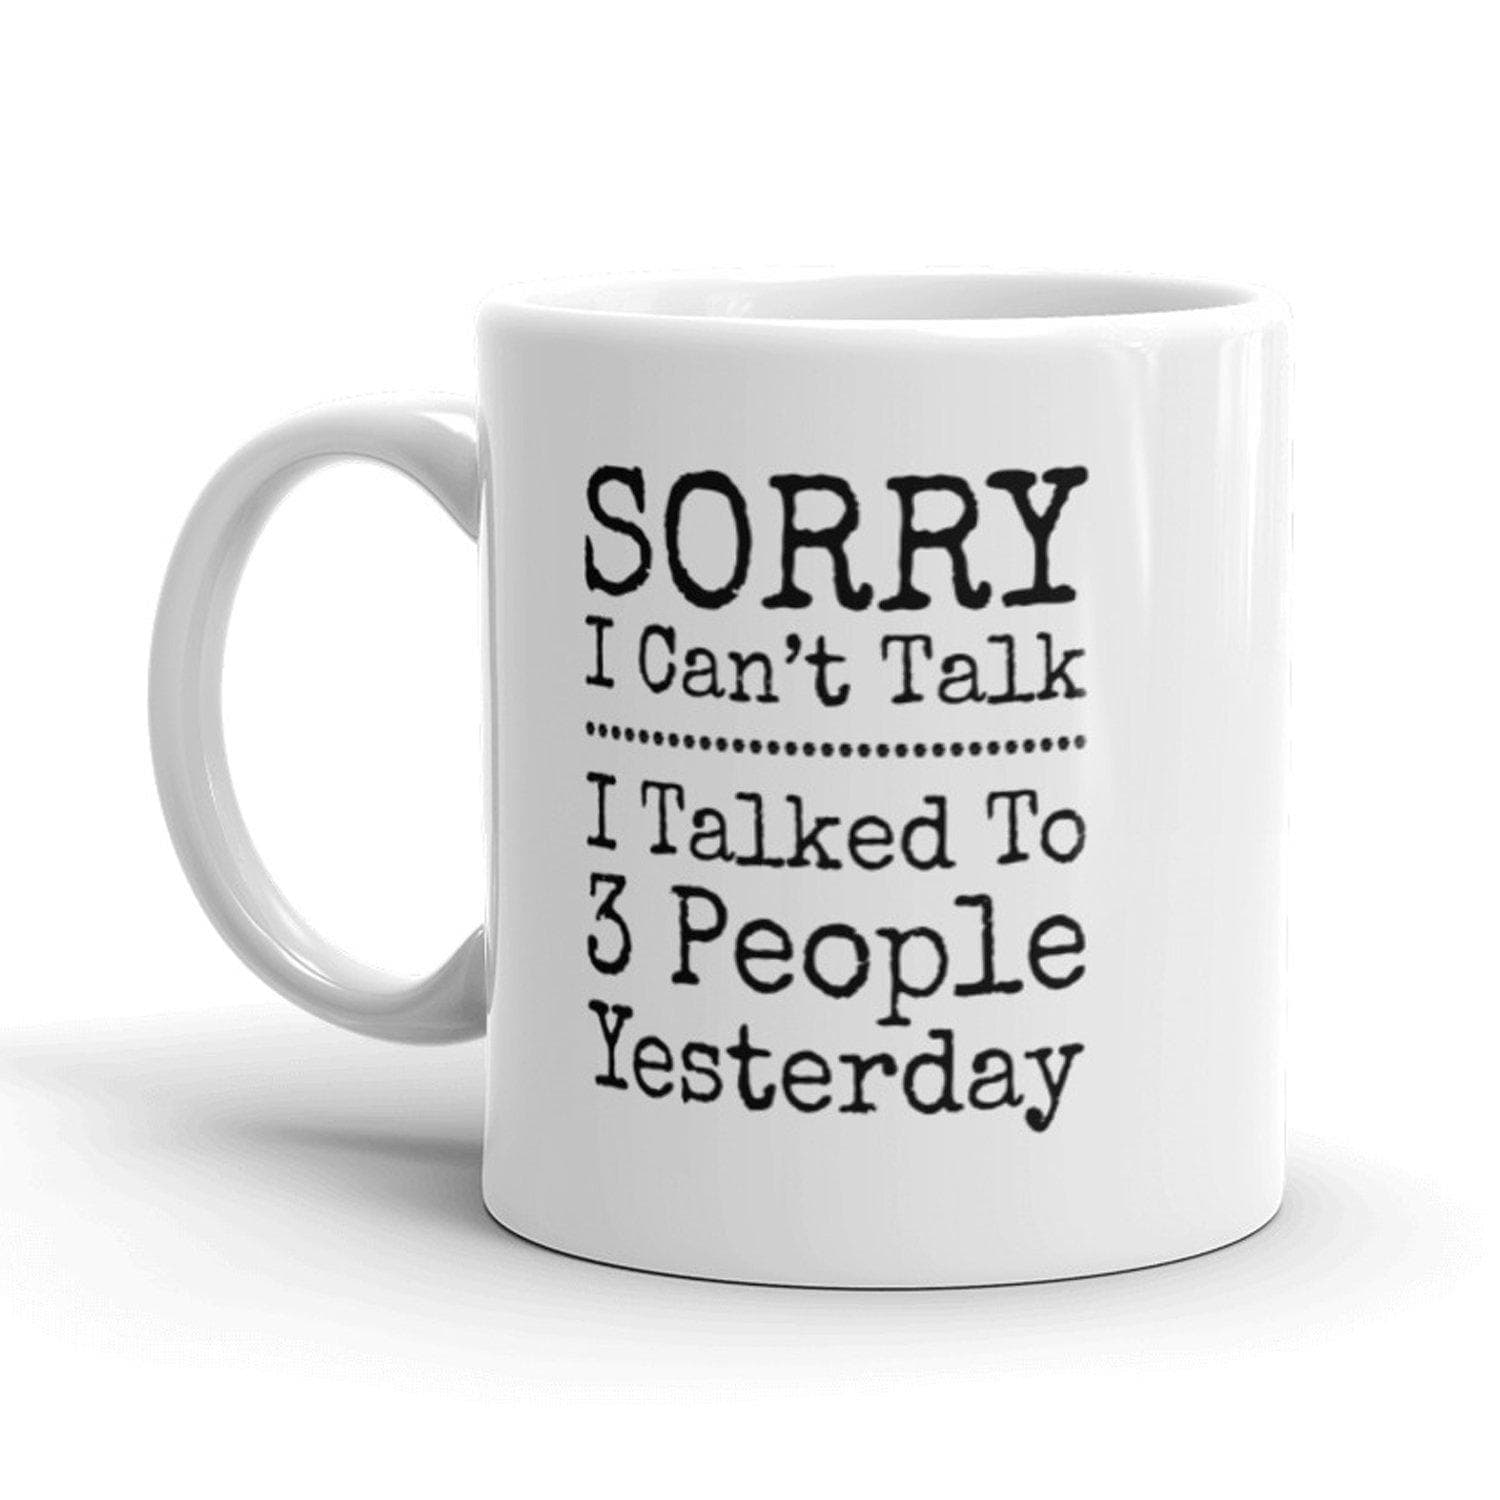 Sorry I Can't Talk I Talked To 3 People Yesterday Mug - Crazy Dog T-Shirts